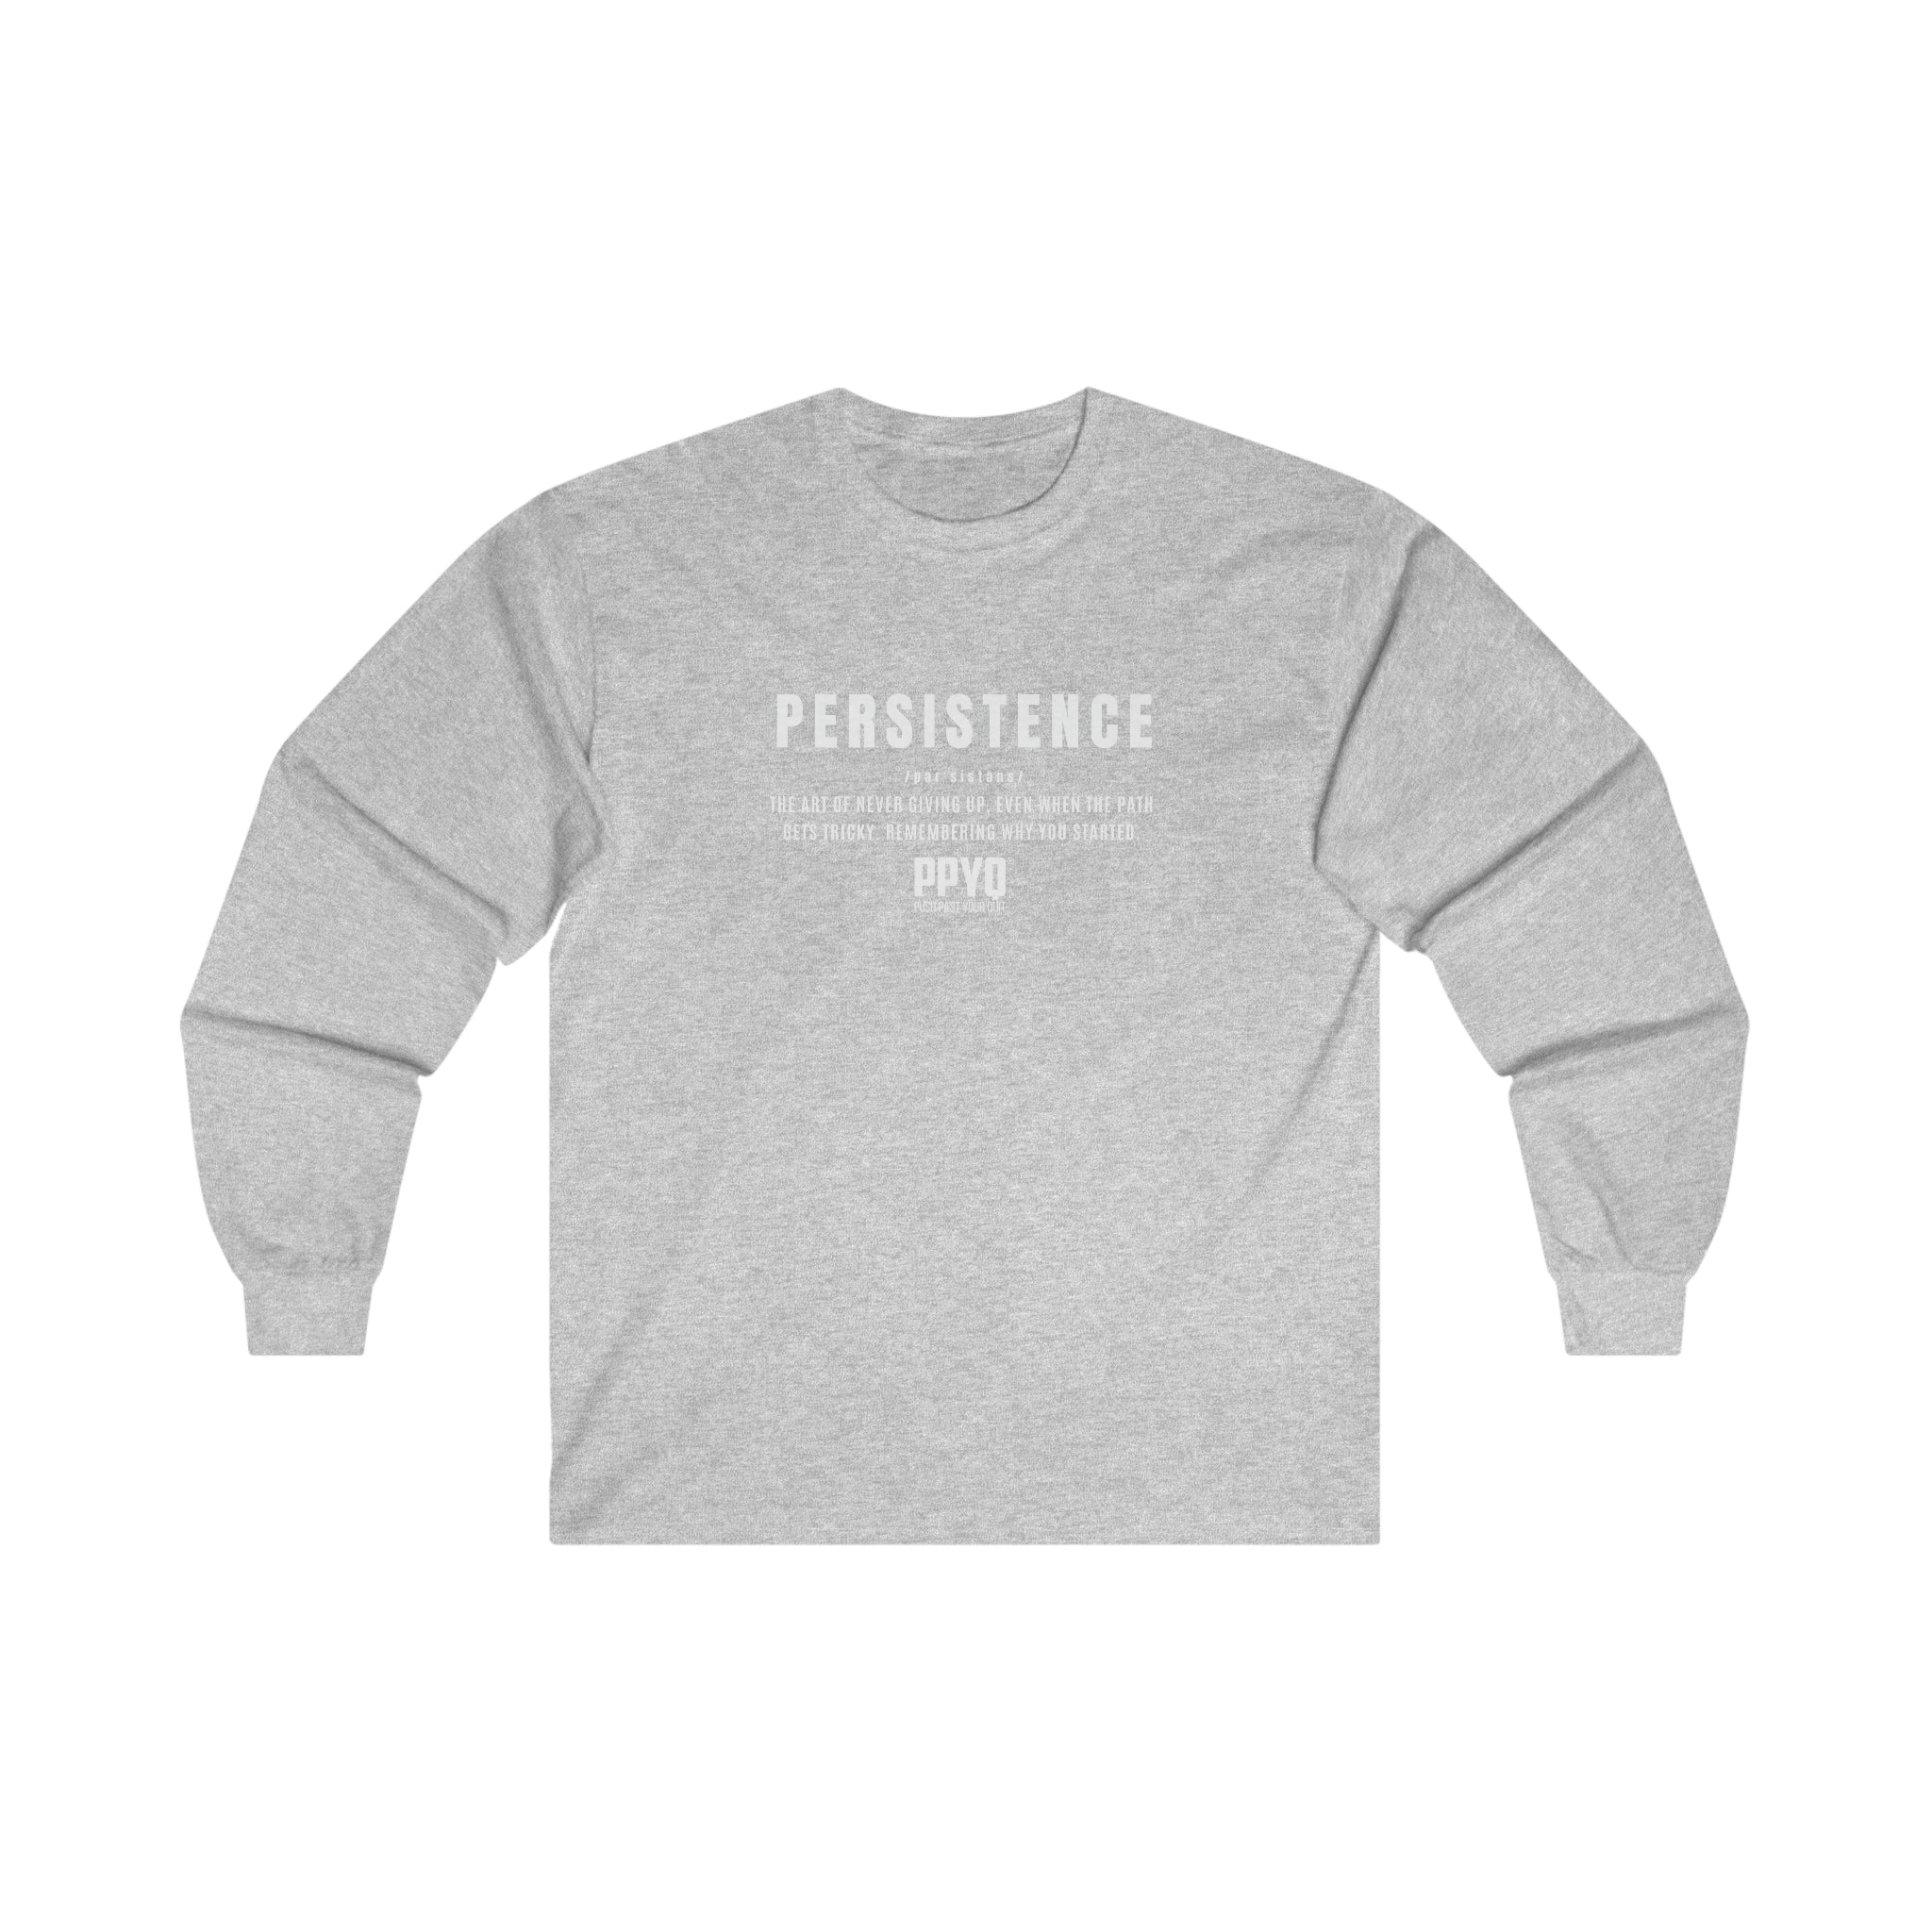 Persistence PPYQ® Defined Long Sleeve Tee